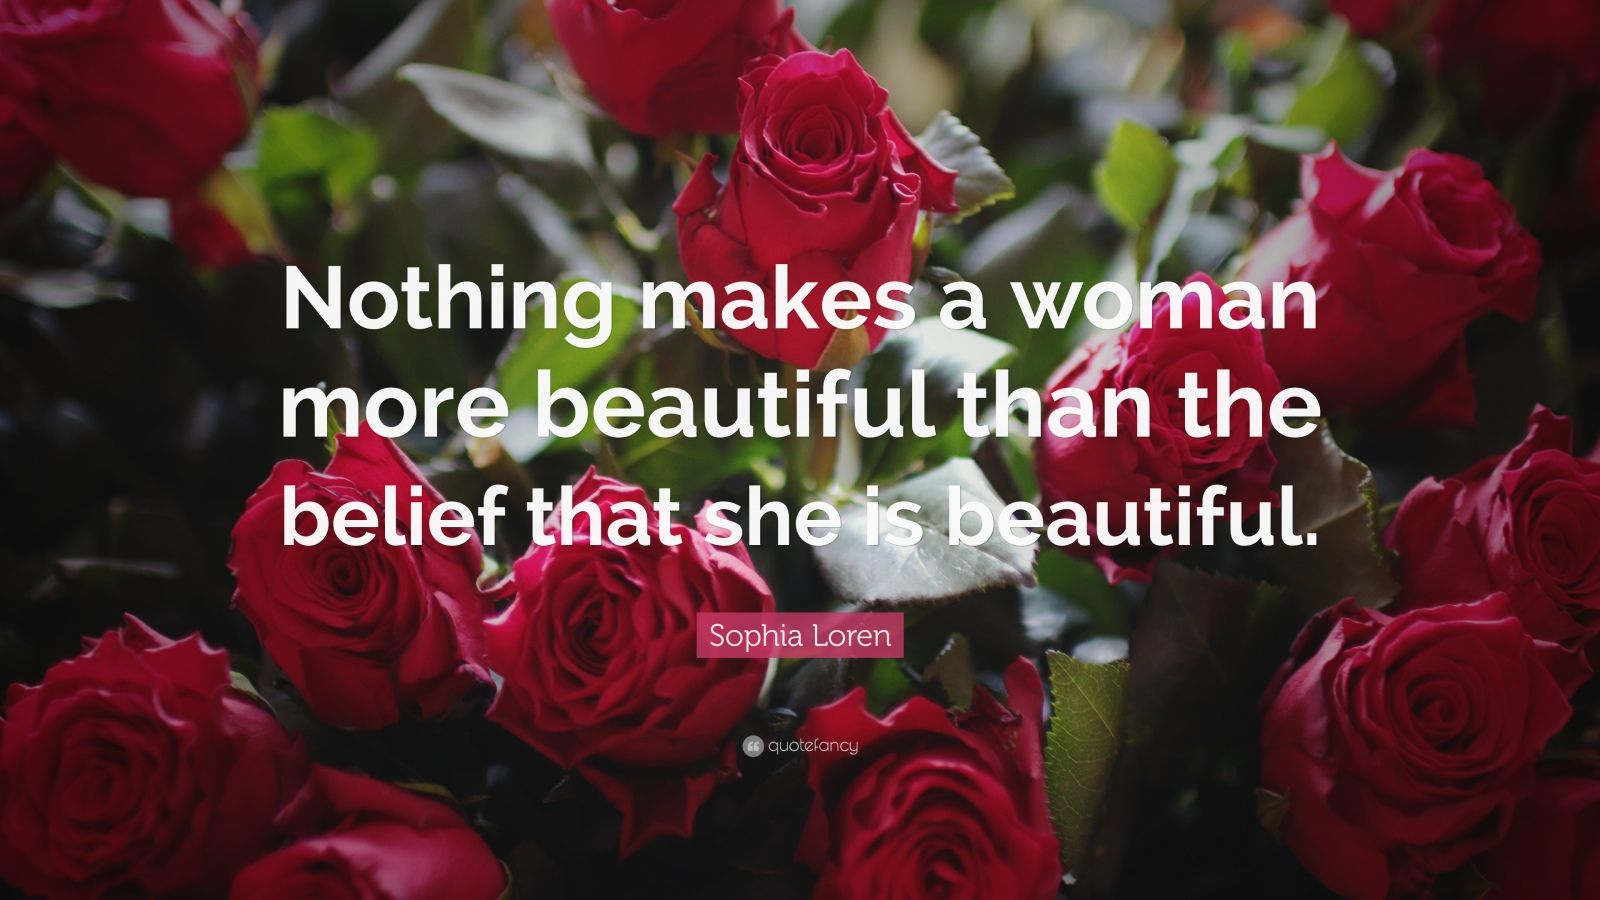 Sophia Loren Quote: “Nothing makes a woman more beautiful than the ...